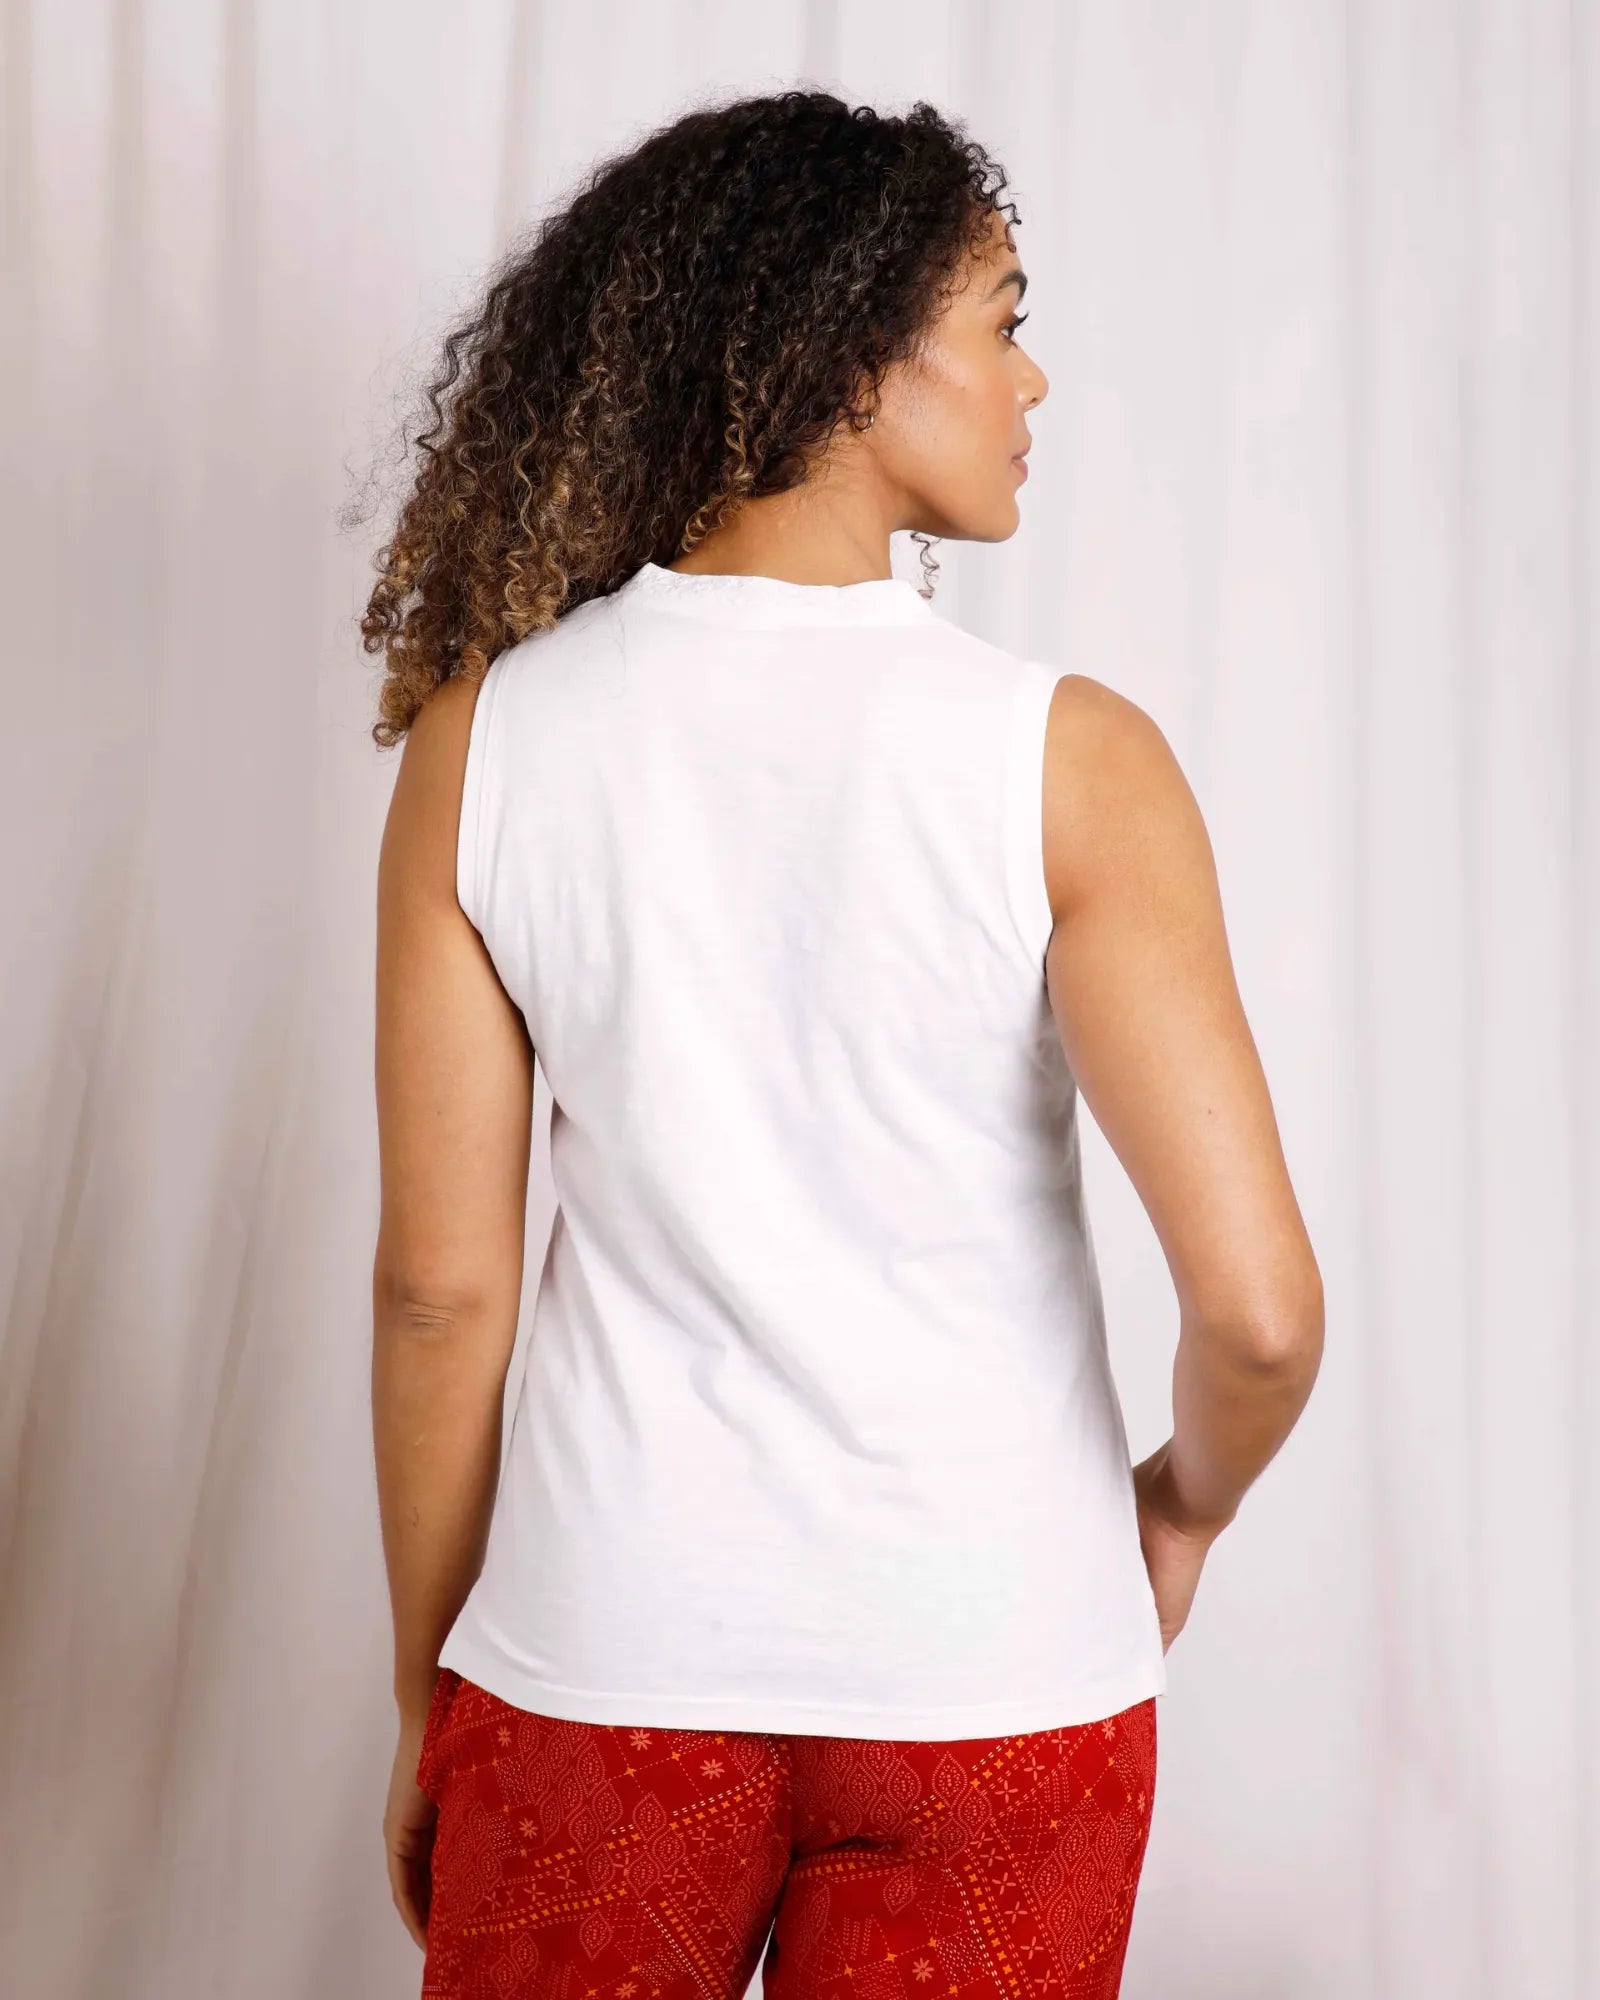 Arenas White Organic Outfitter Cotton Vest